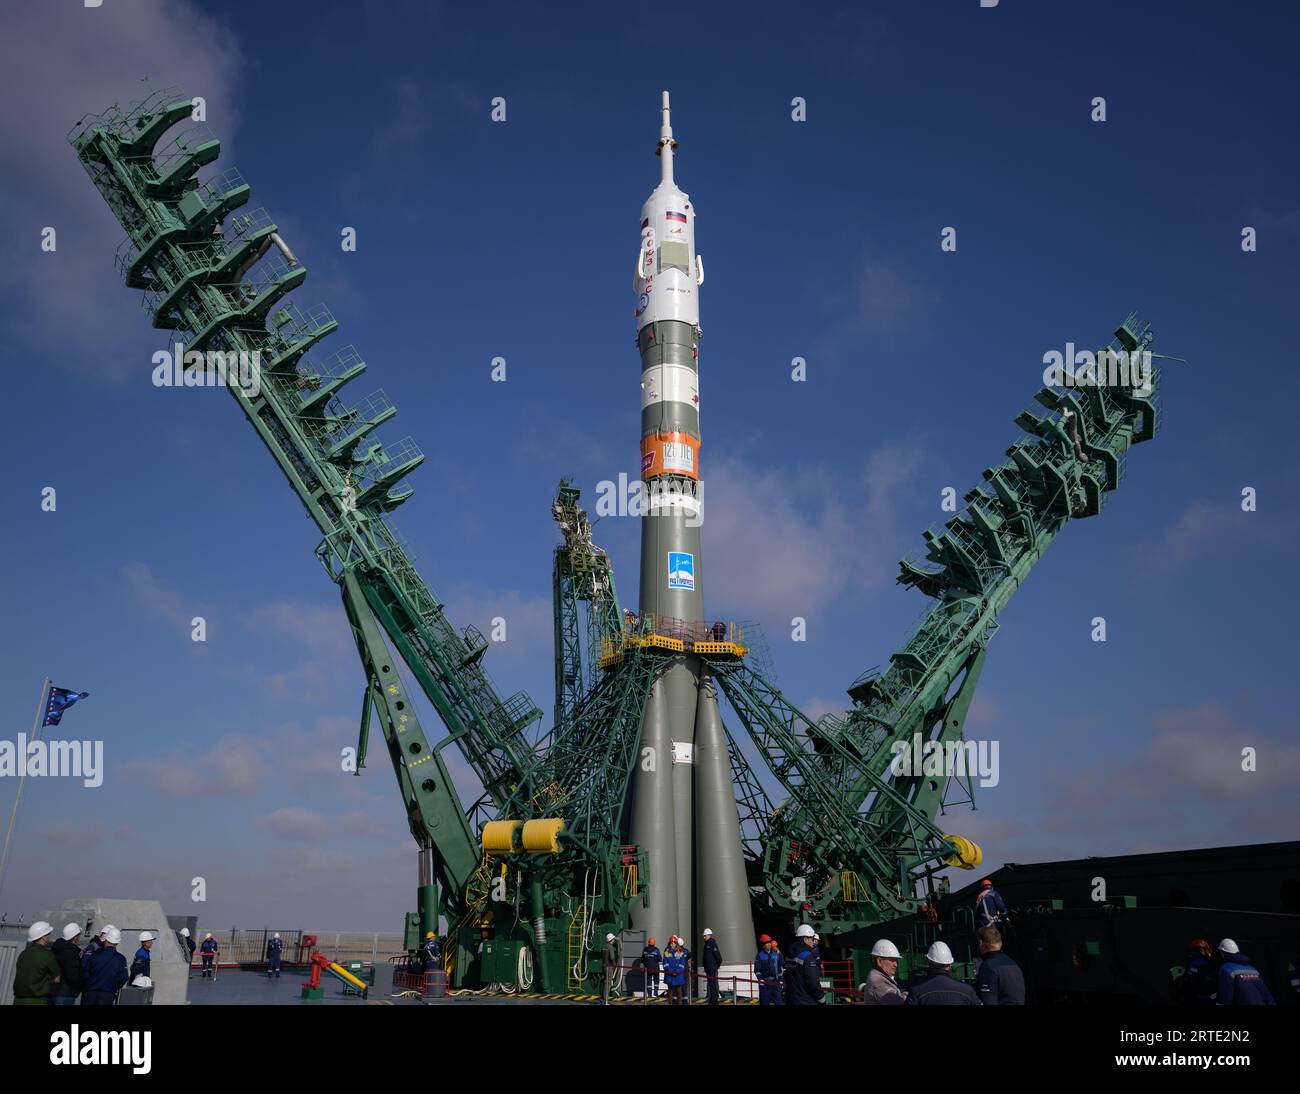 Baikonur, Kazakhstan. 12th Sep, 2023. The Russian Soyuz MS-24 spacecraft and booster rocket is positioned upright as the gantry closes following the roll-out to launch pad 31 at the Baikonur Cosmodrome, September 12, 2023 in Baikonur, Kazakhstan. International Space Station Expedition 70 crew members astronaut Loral O'Hara of NASA, and cosmonauts Oleg Kononenko, and Nikolai Chub of Roscosmos are set to launch September 15th to the orbiting laboratory. Credit: Bill Ingalls/NASA/Alamy Live News Stock Photo